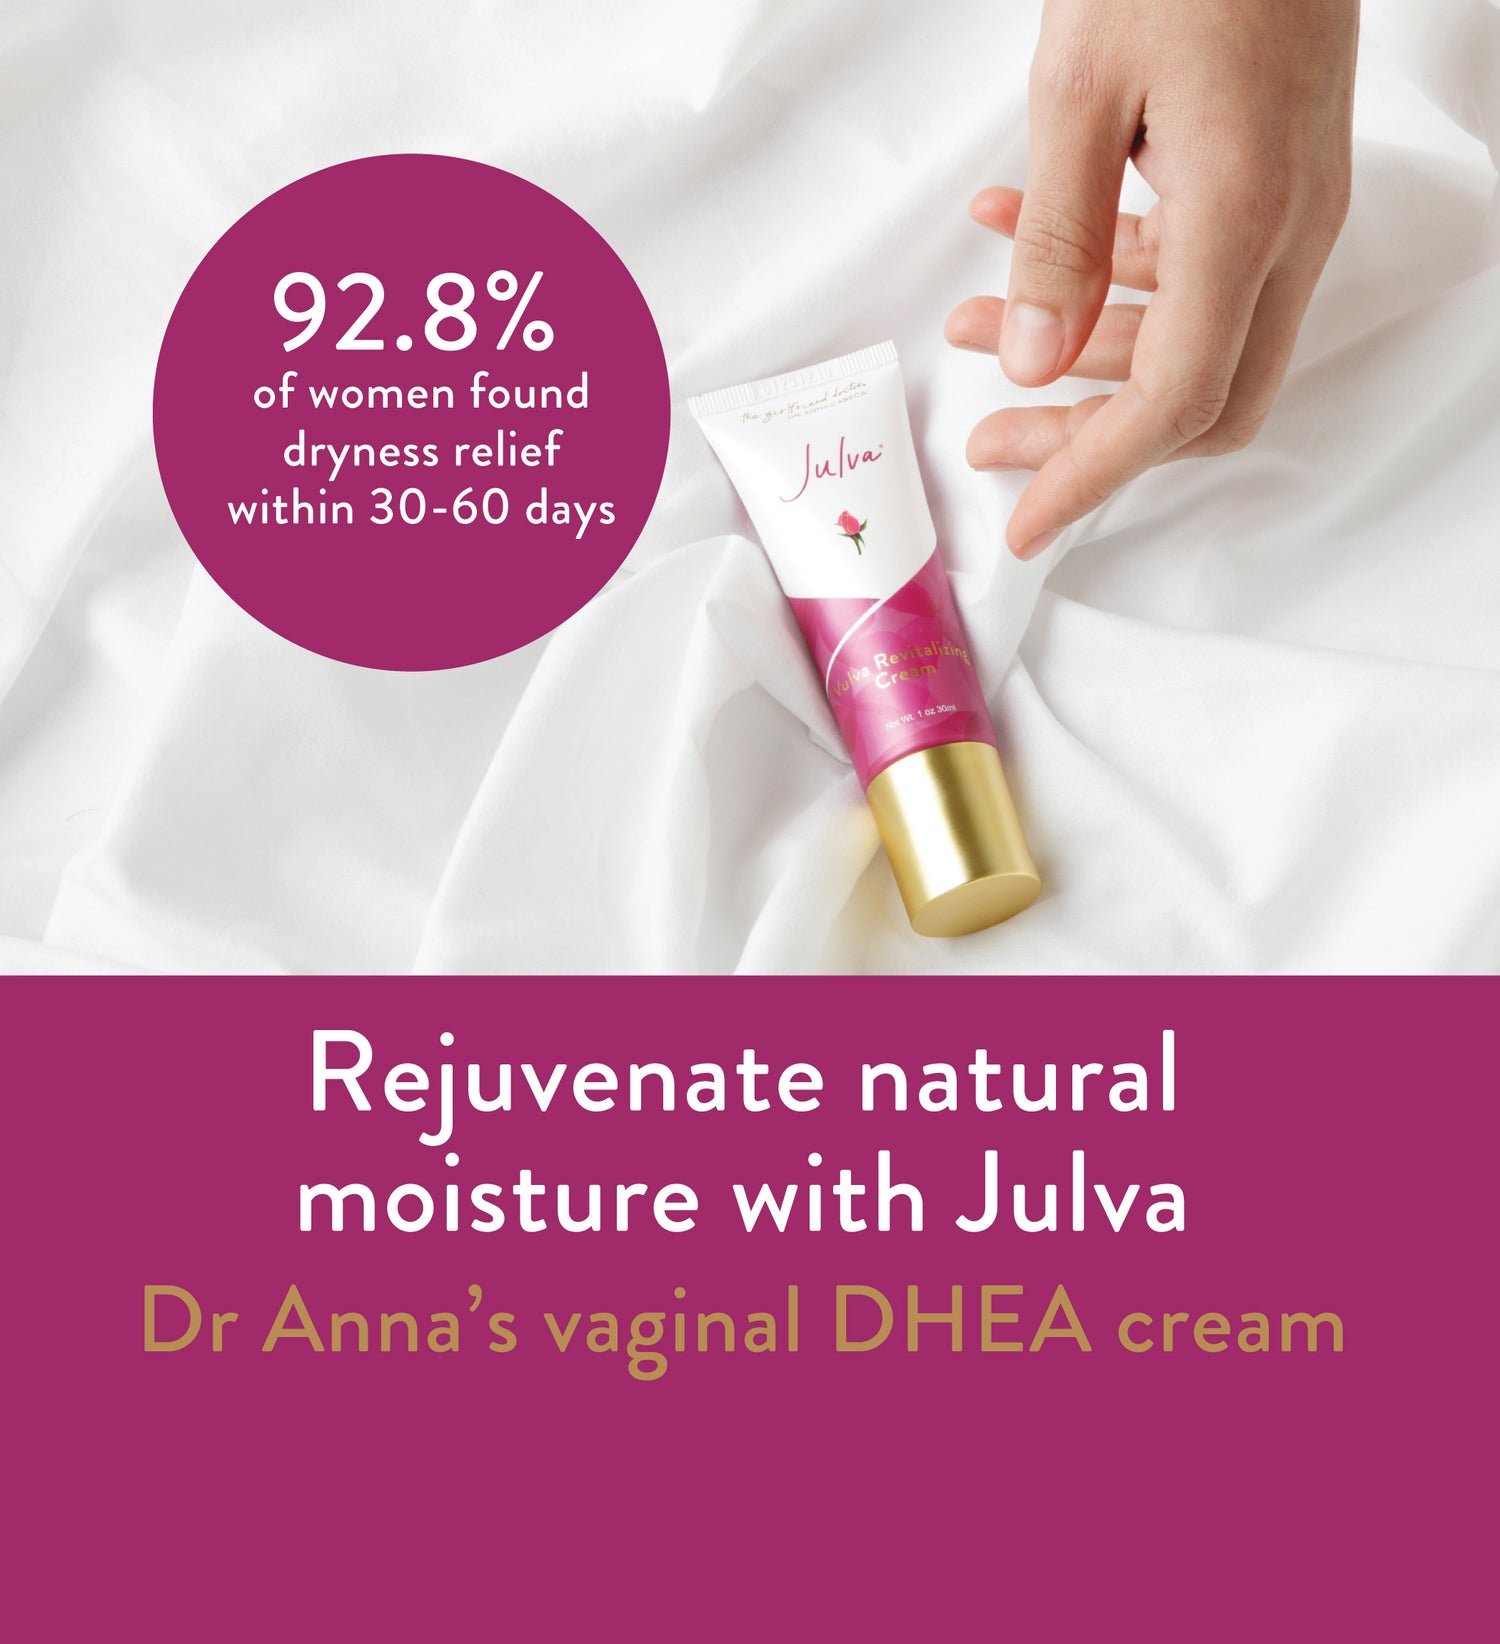 Rejuvenate natural moisture with Julva, Dr. Anna's vaginal DHEA cream. 92.8% of women found dryness relief within 30-60 days